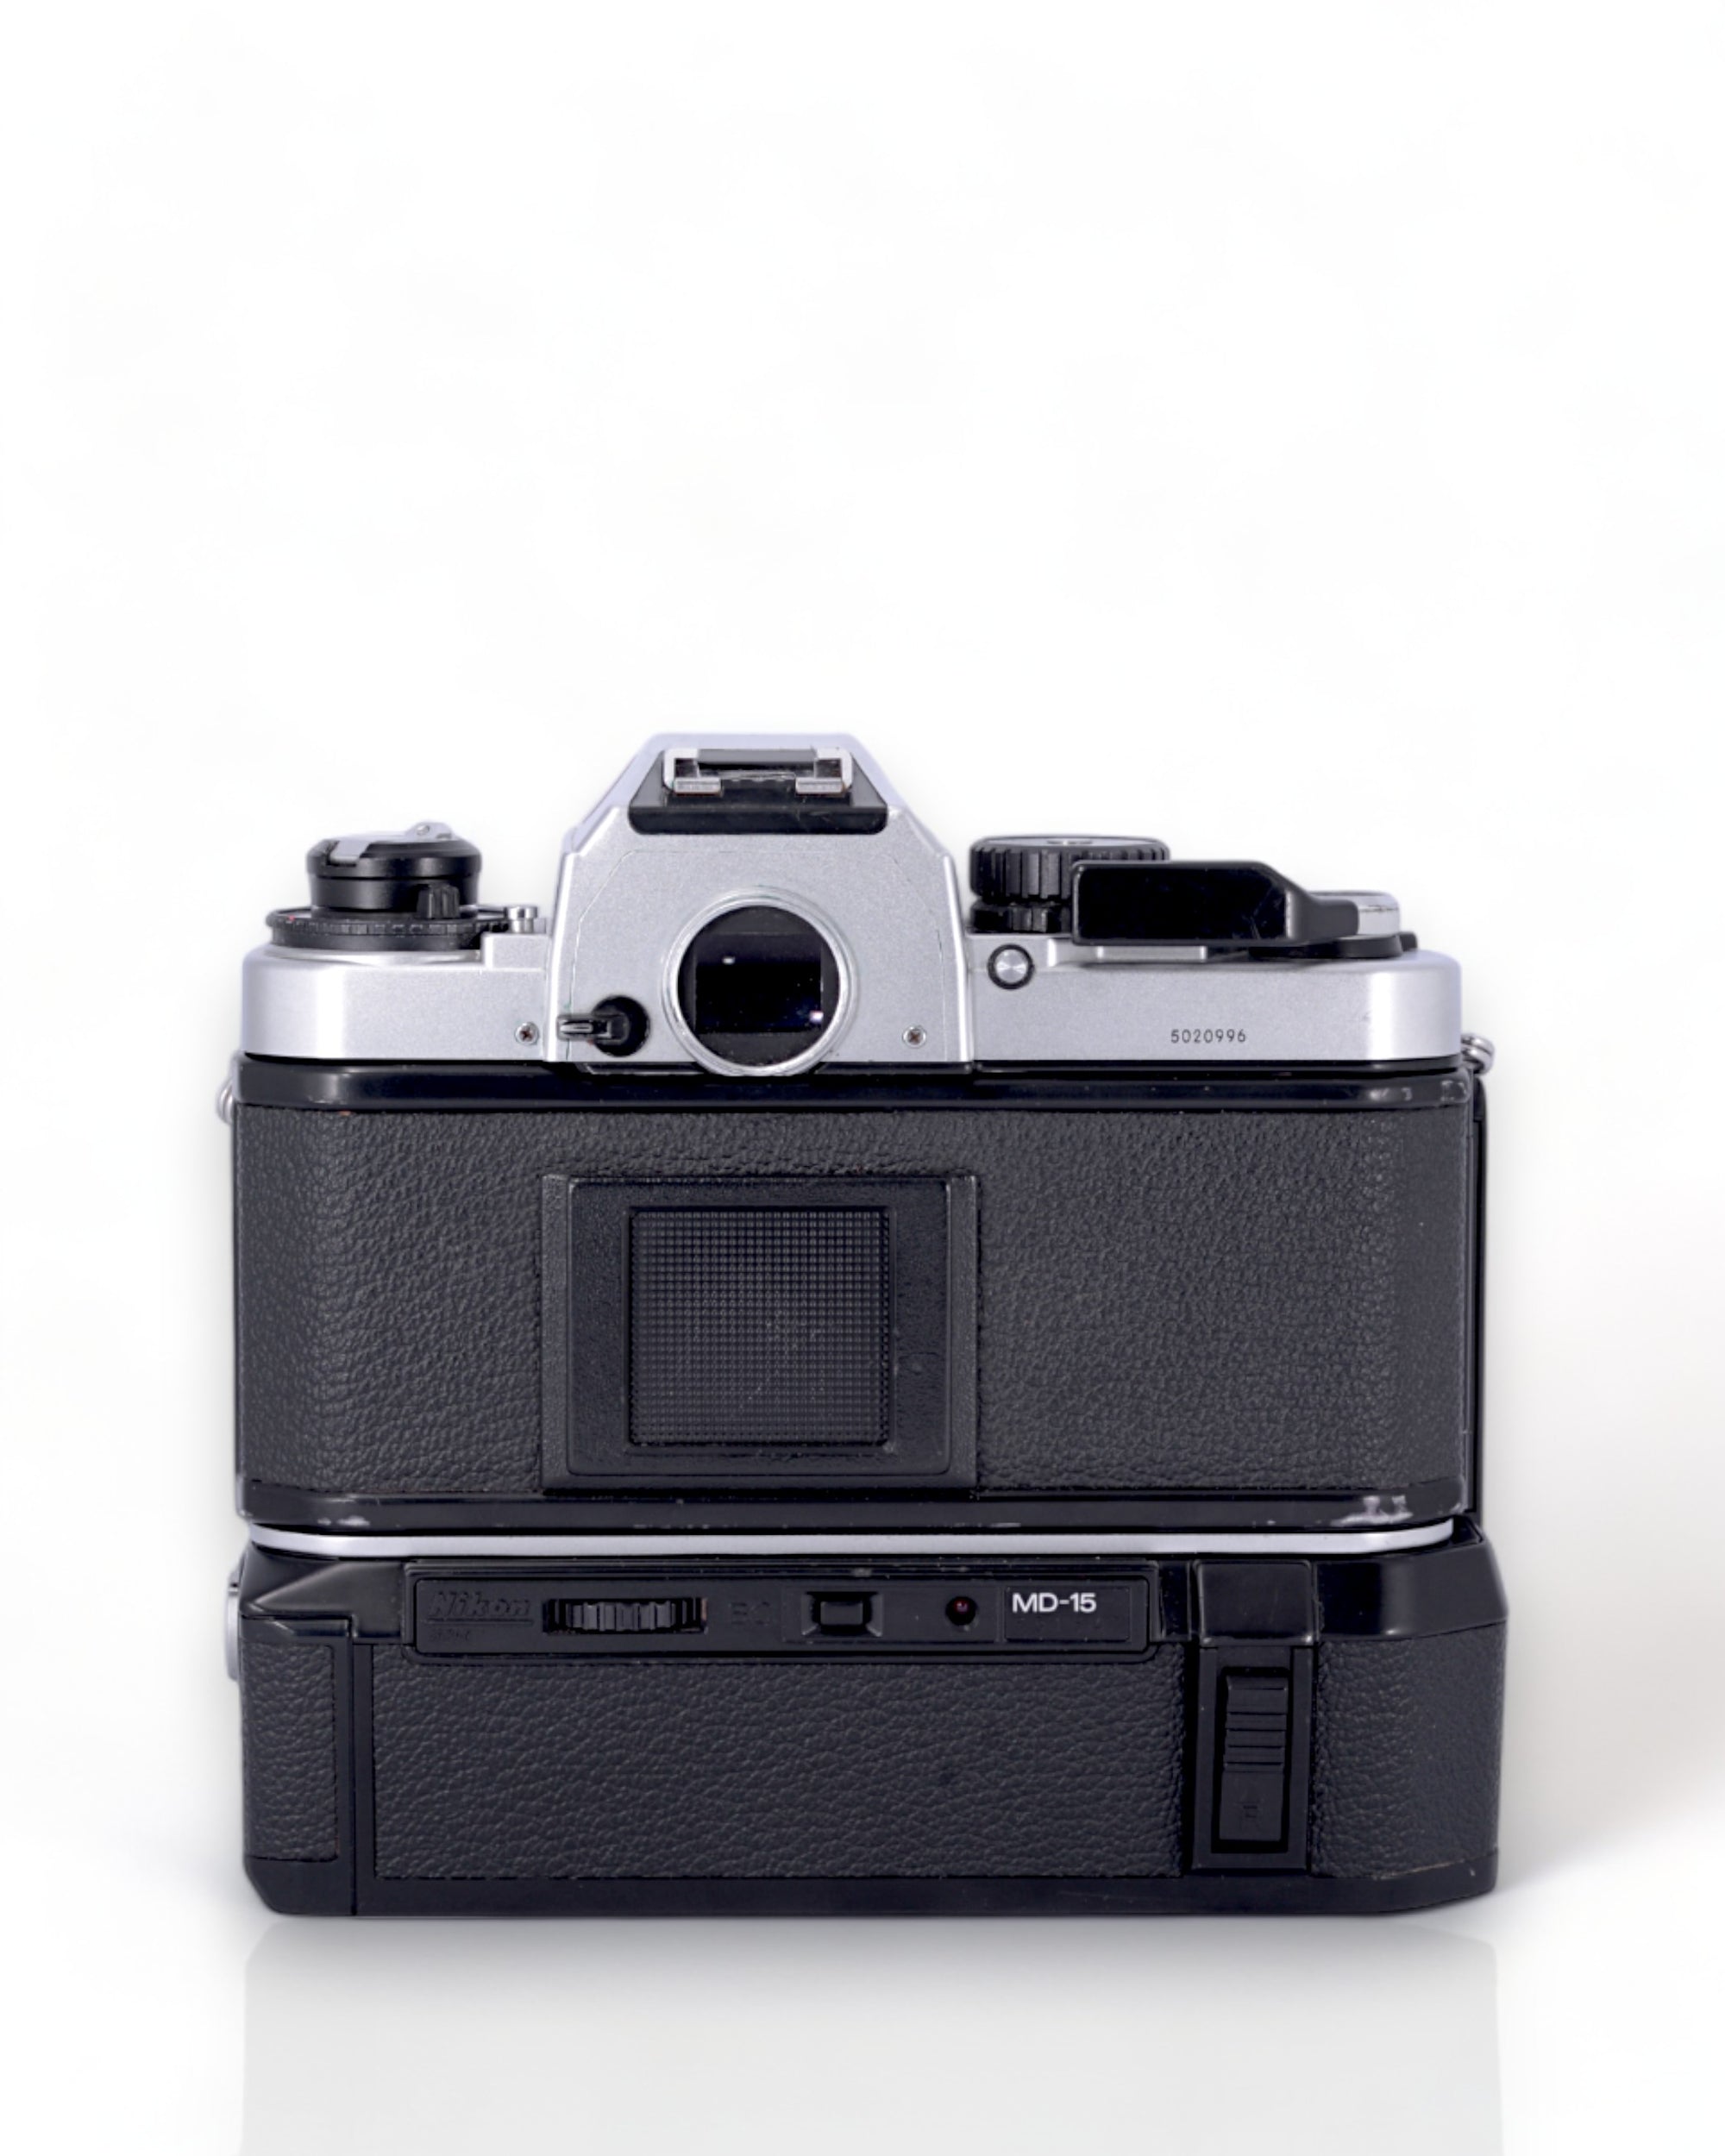 Nikon FA 35mm SLR Film Camera with motor drive body only